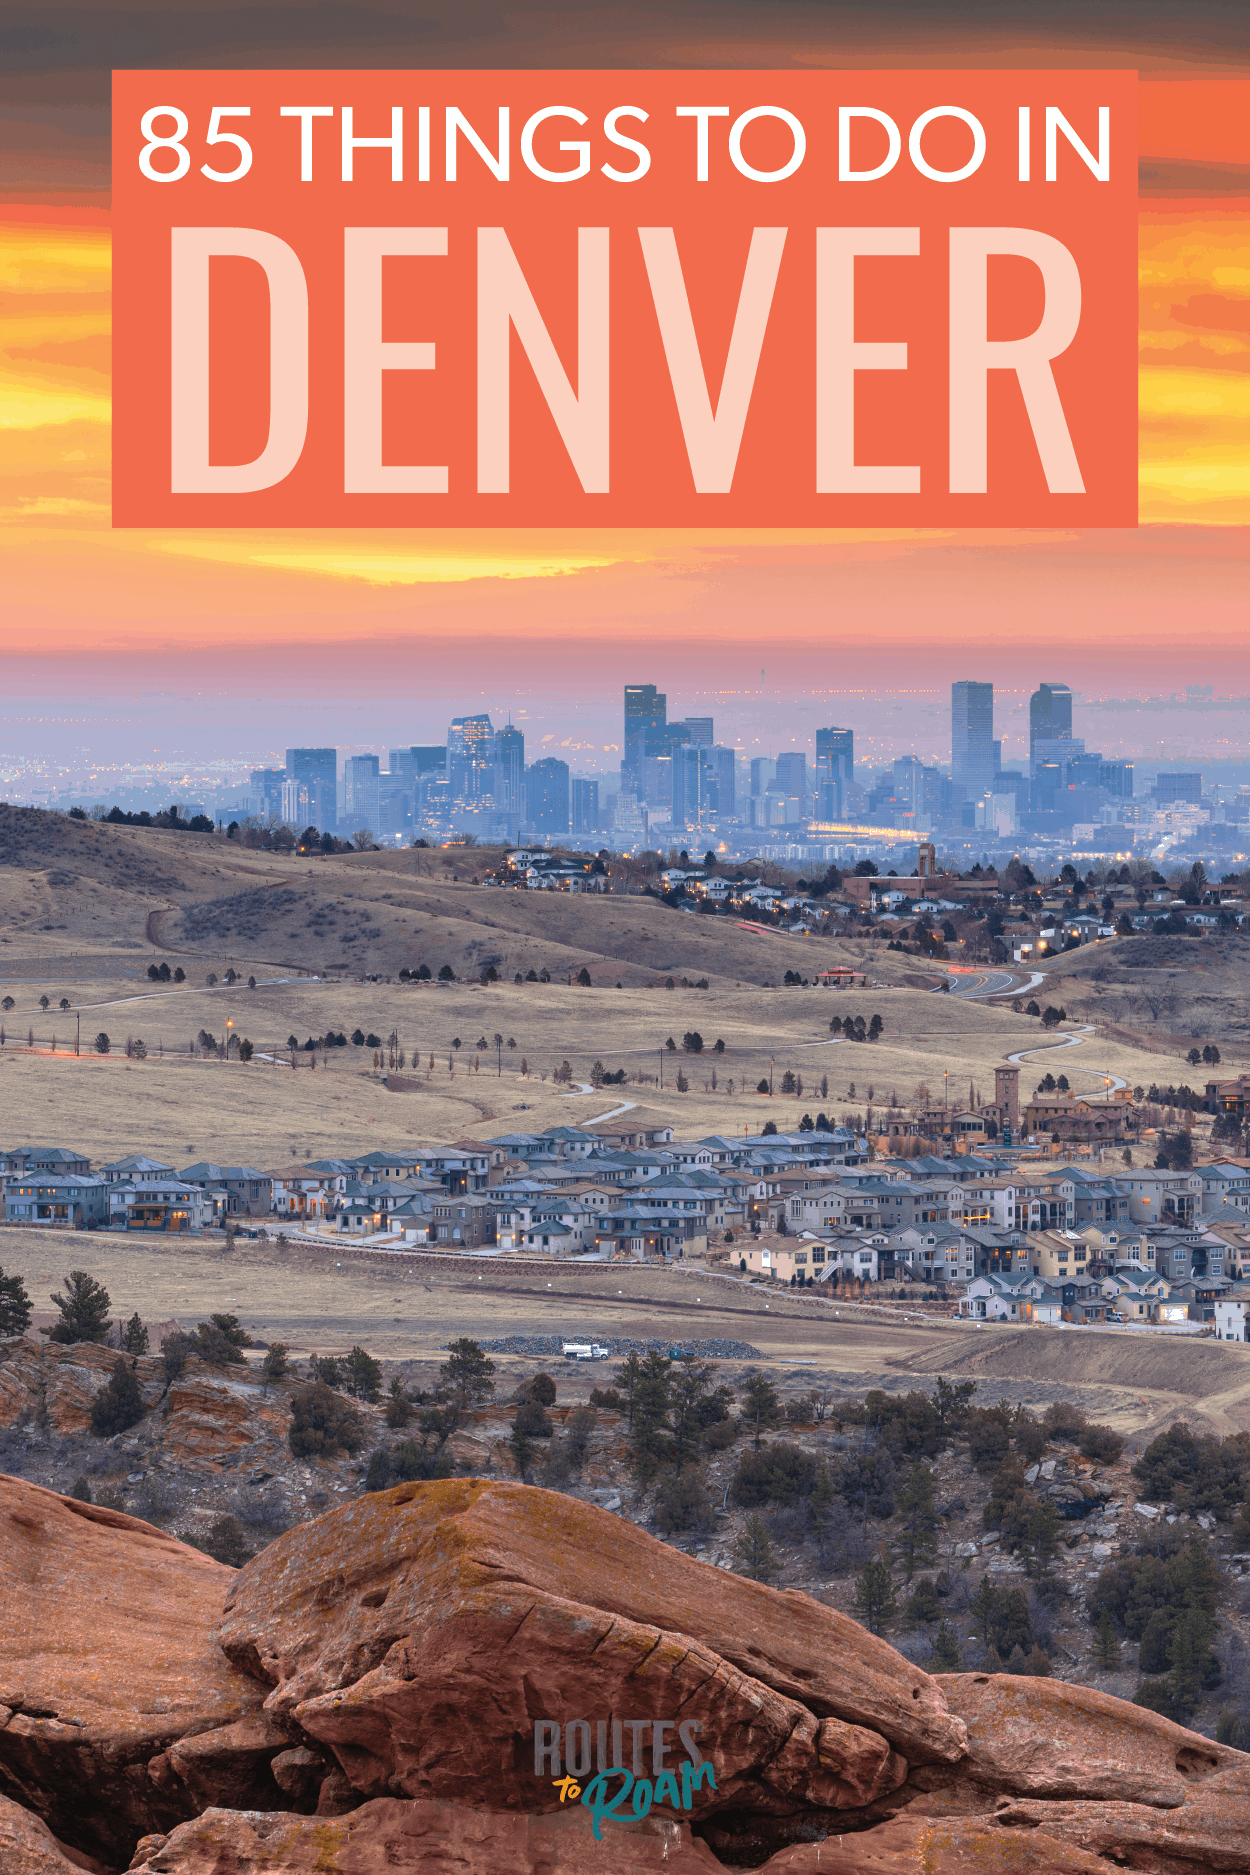 85 Things To Do in Denver - Routes to Roam